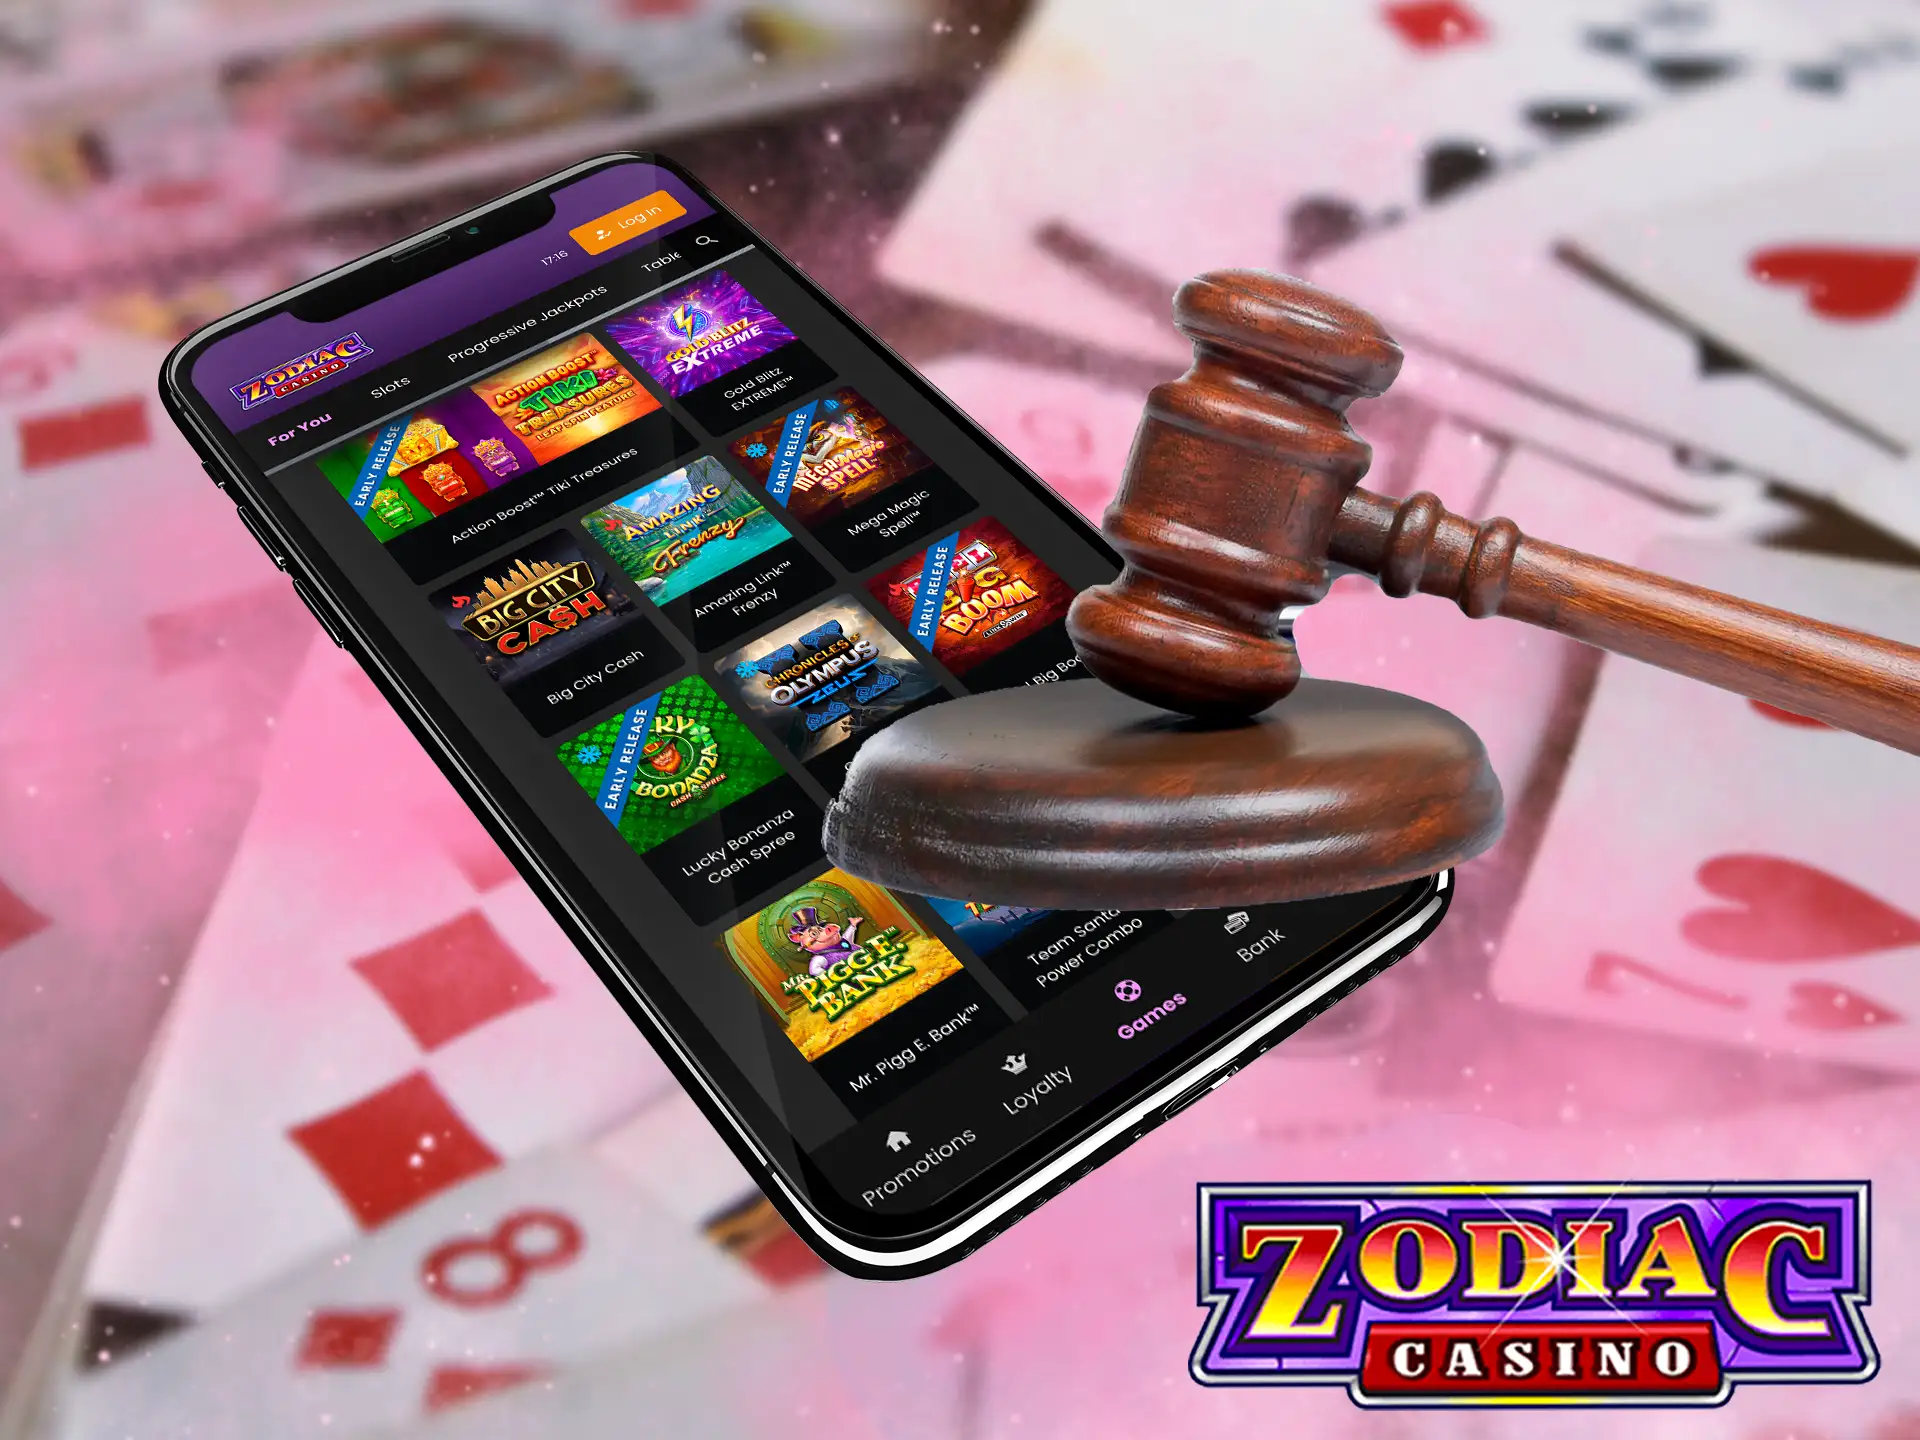 Zodiac Casino operates completely legally, its use is completely safe, and it is also verified by regulatory authorities.